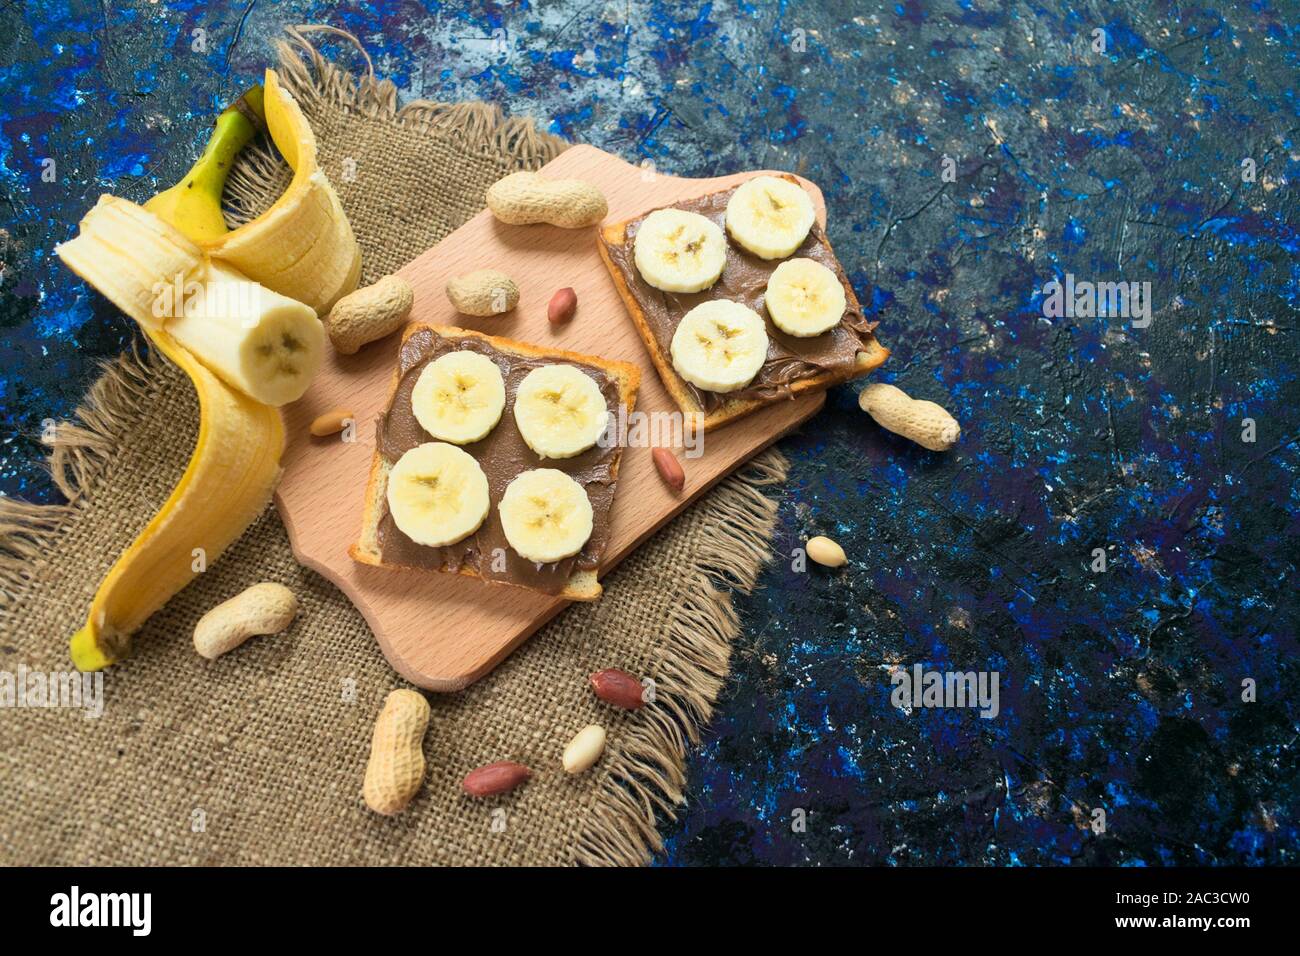 Toast with chocolate peanut butter and banana. Top view. Stock Photo